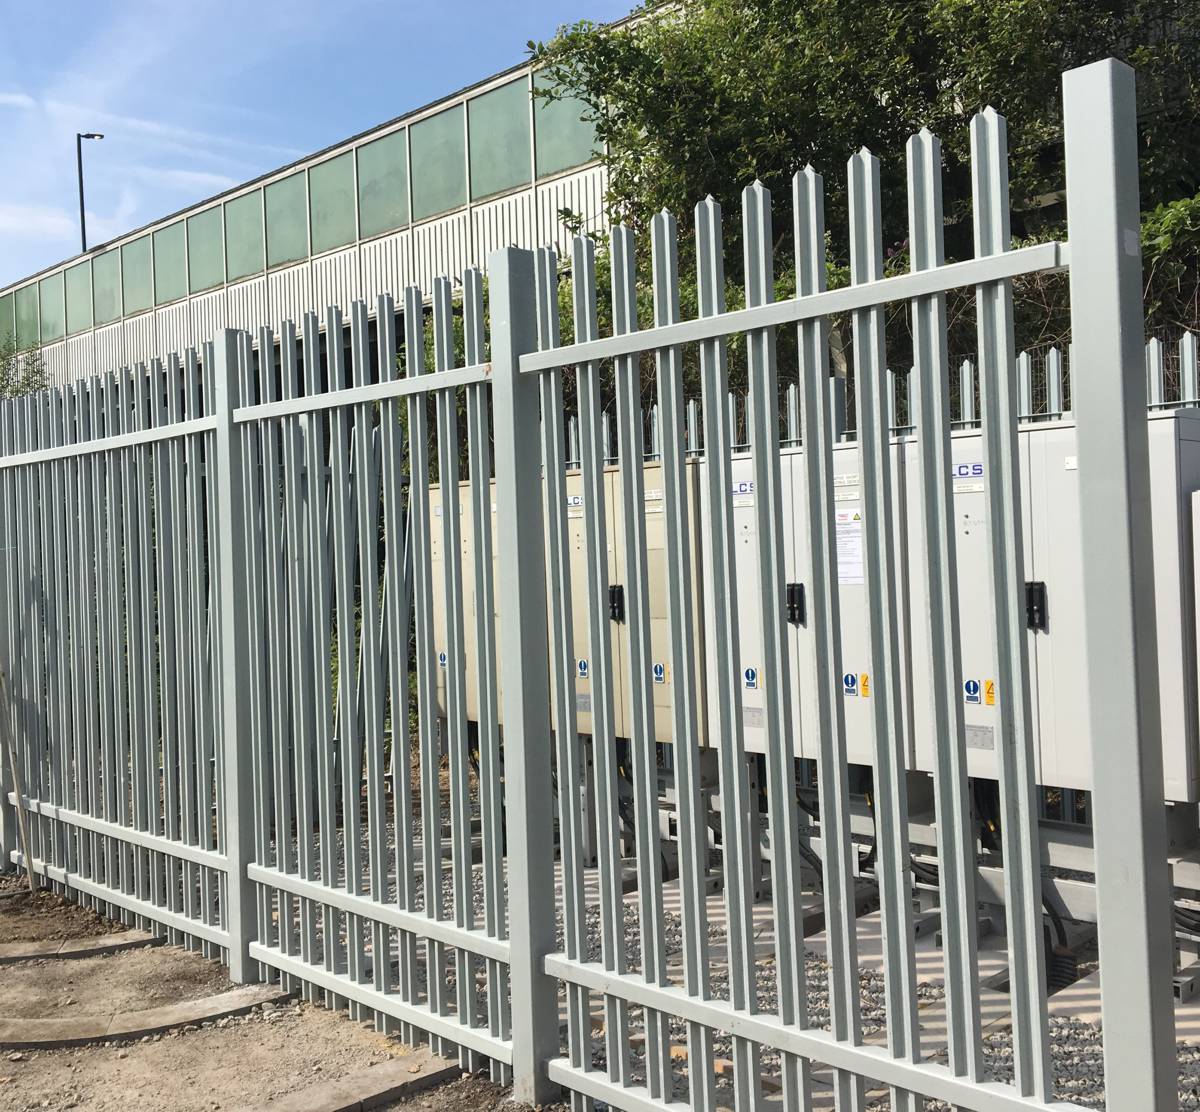 Scott Parnell awarded trademark for their innovative safety fencing